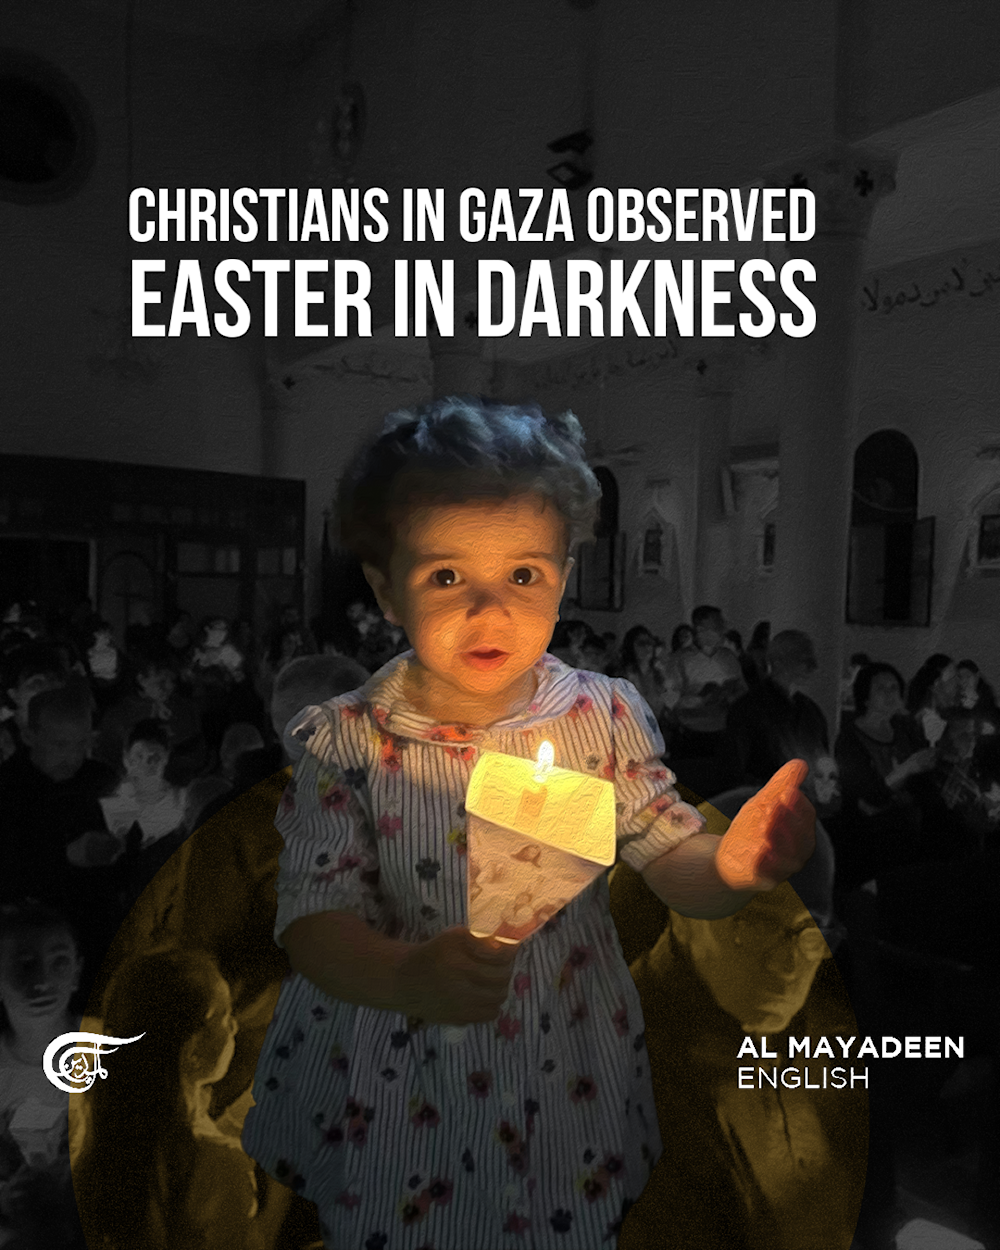 Christians in Gaza observed Easter in darkness